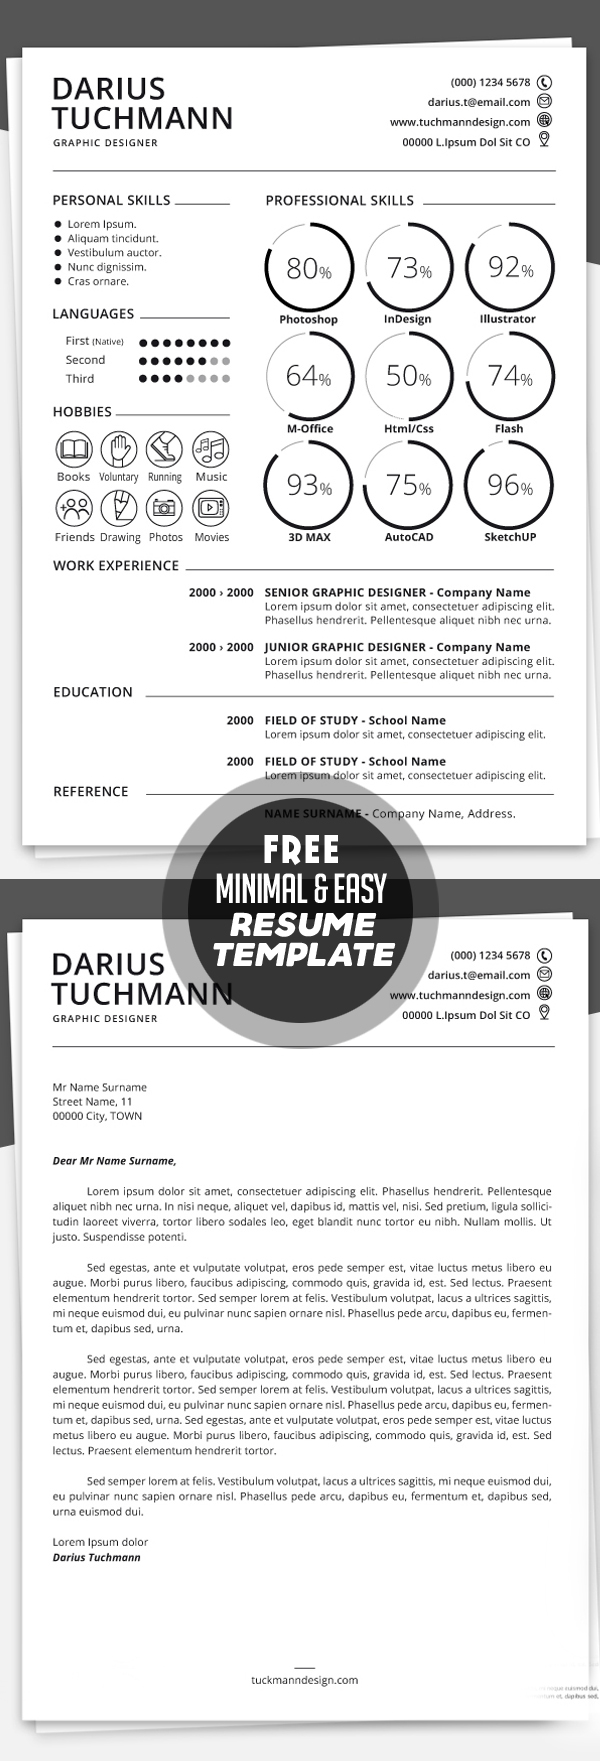 Free Resume Template + Cover Letter